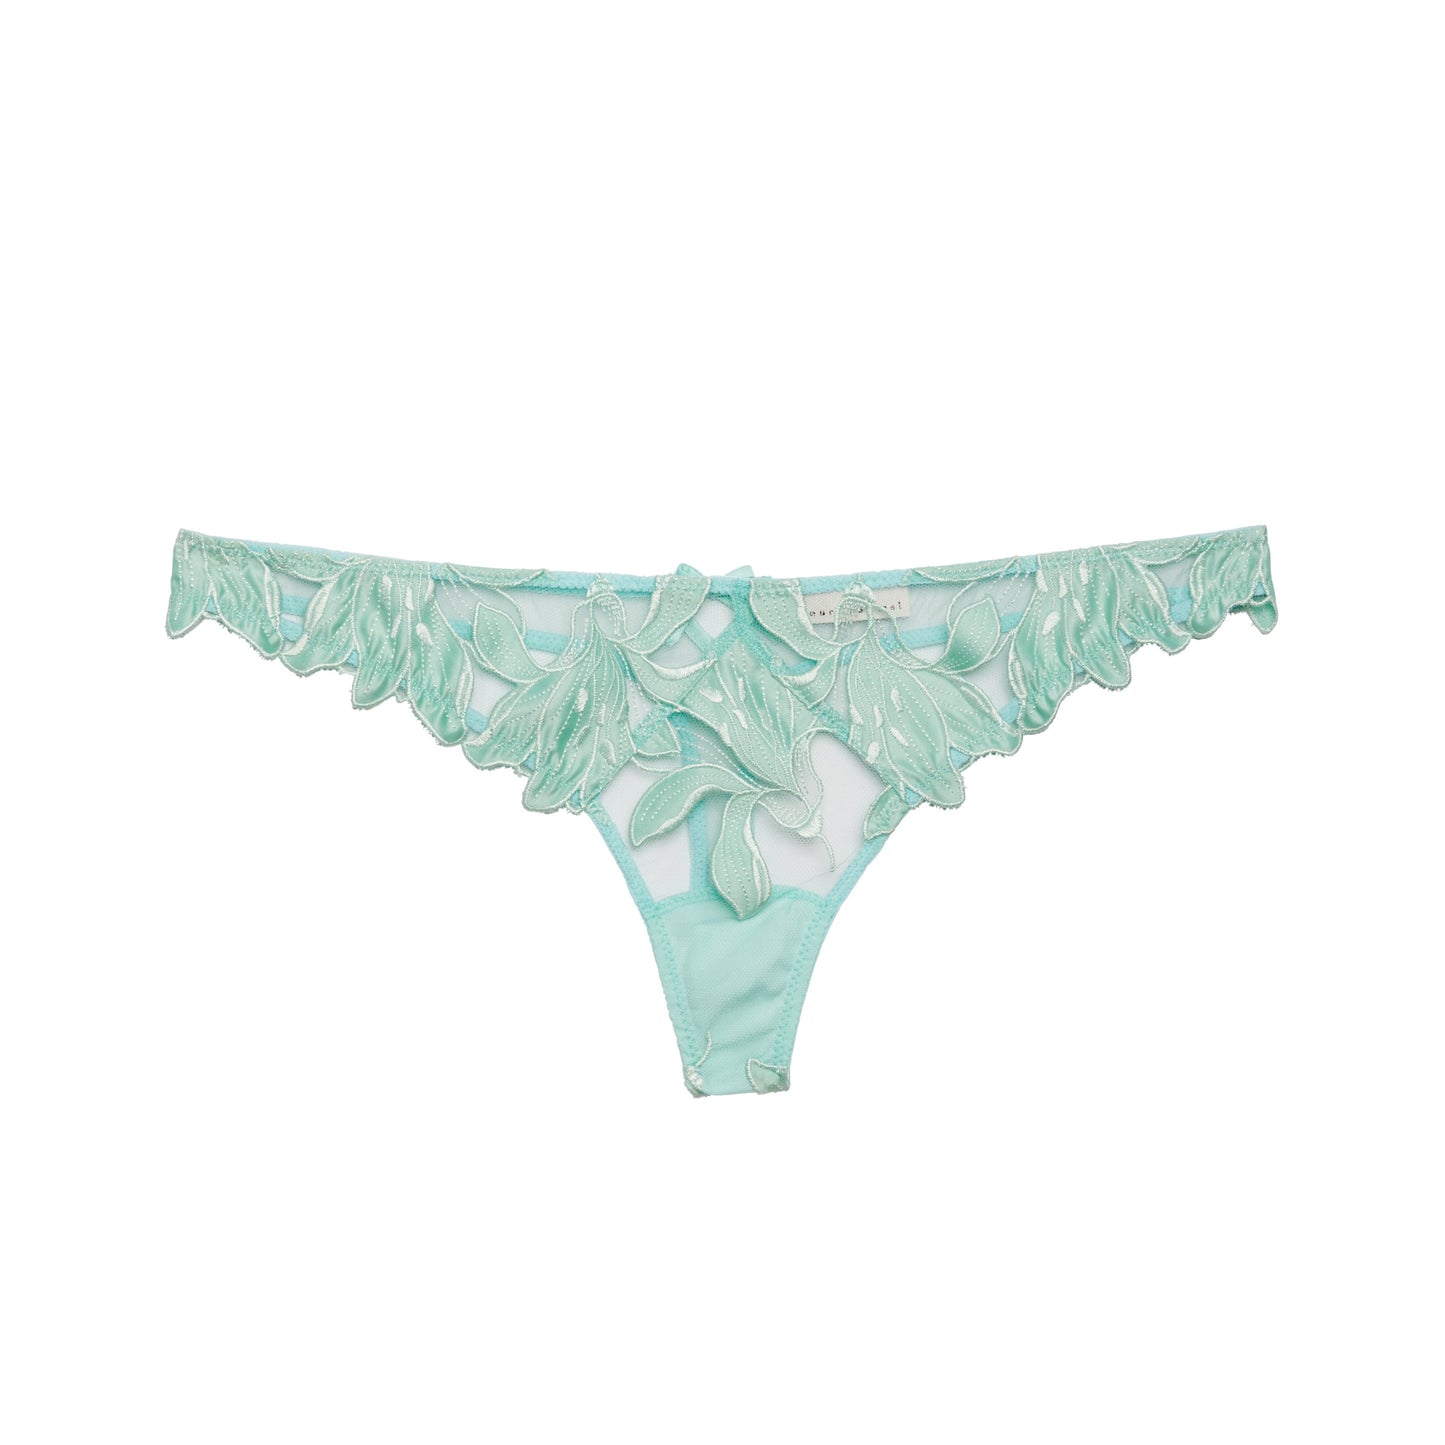 Fleur Du Mal Lily Embroidery Hipster Thong